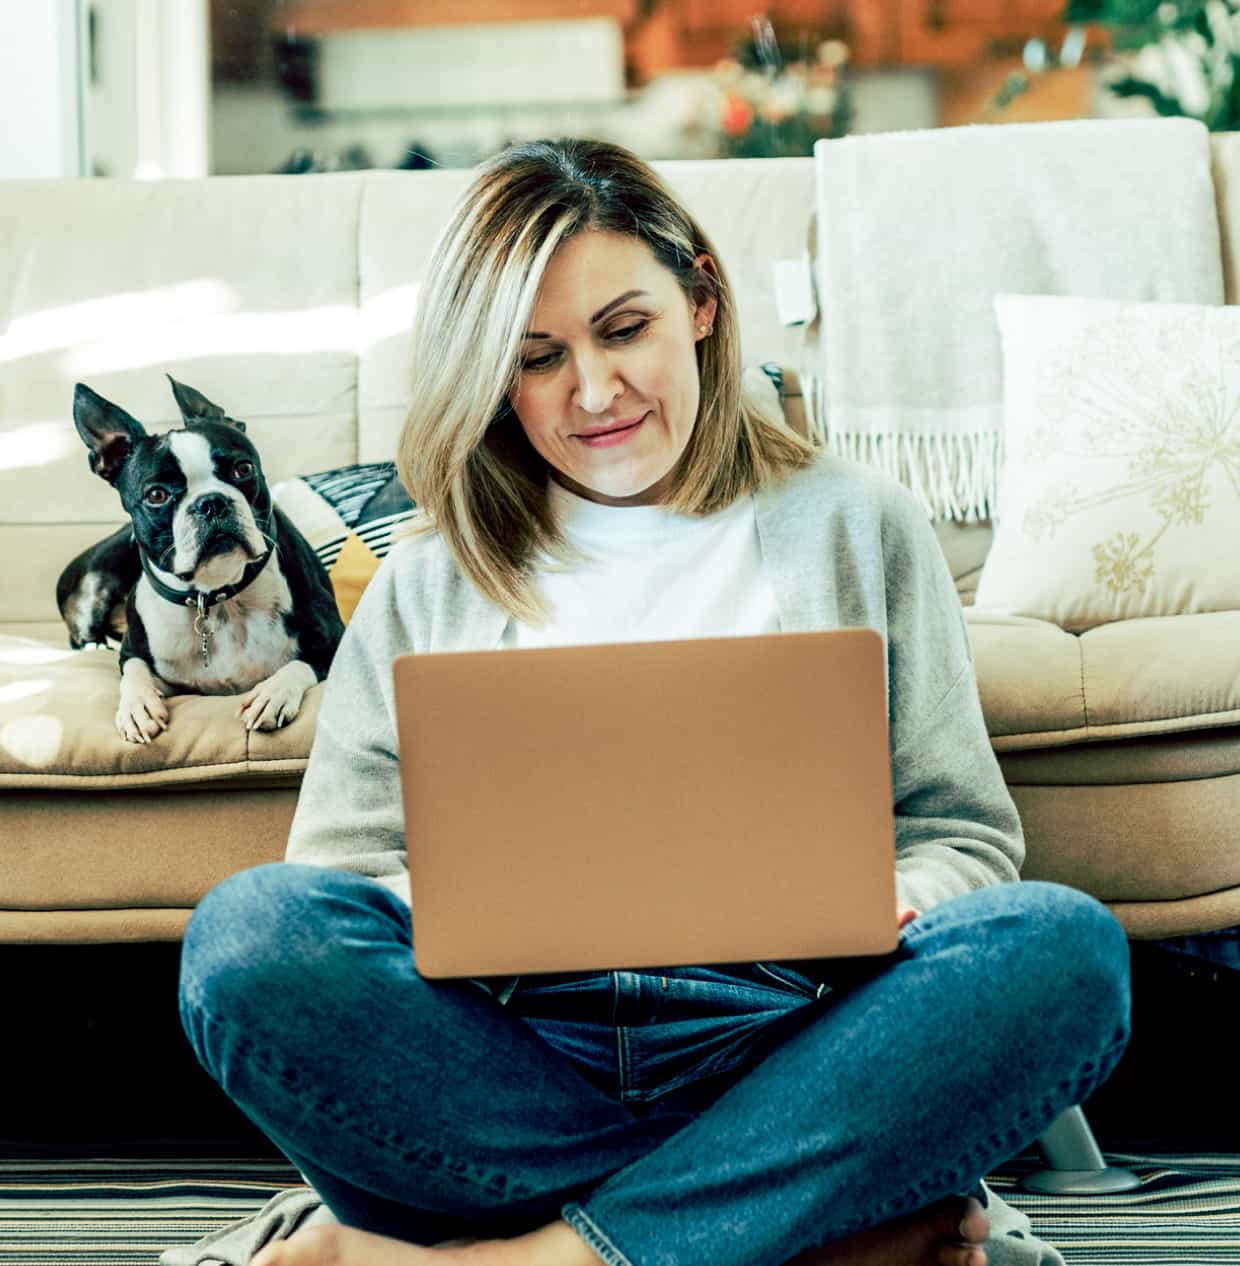 A woman sits cross-legged on the floor working on a laptop, with a dog on the couch behind her.